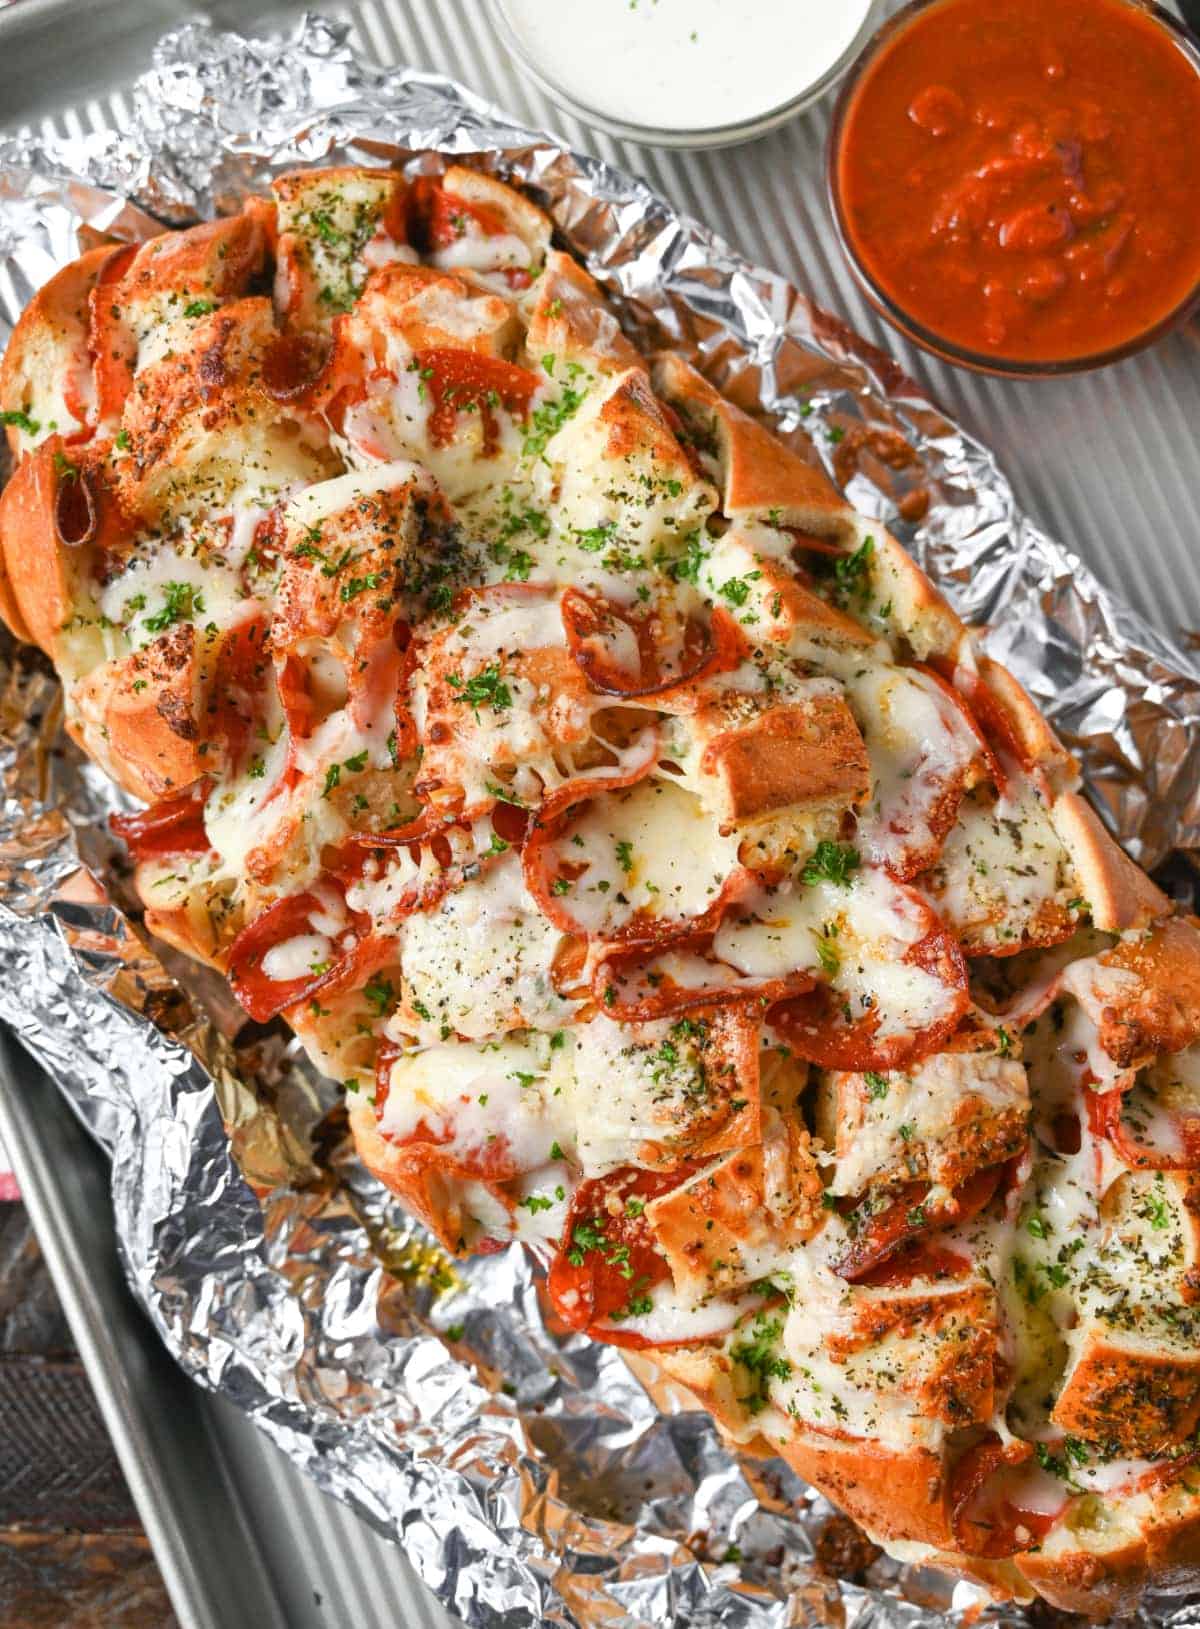 Pepperoni pull apart bread unwrapped but setting in foil.